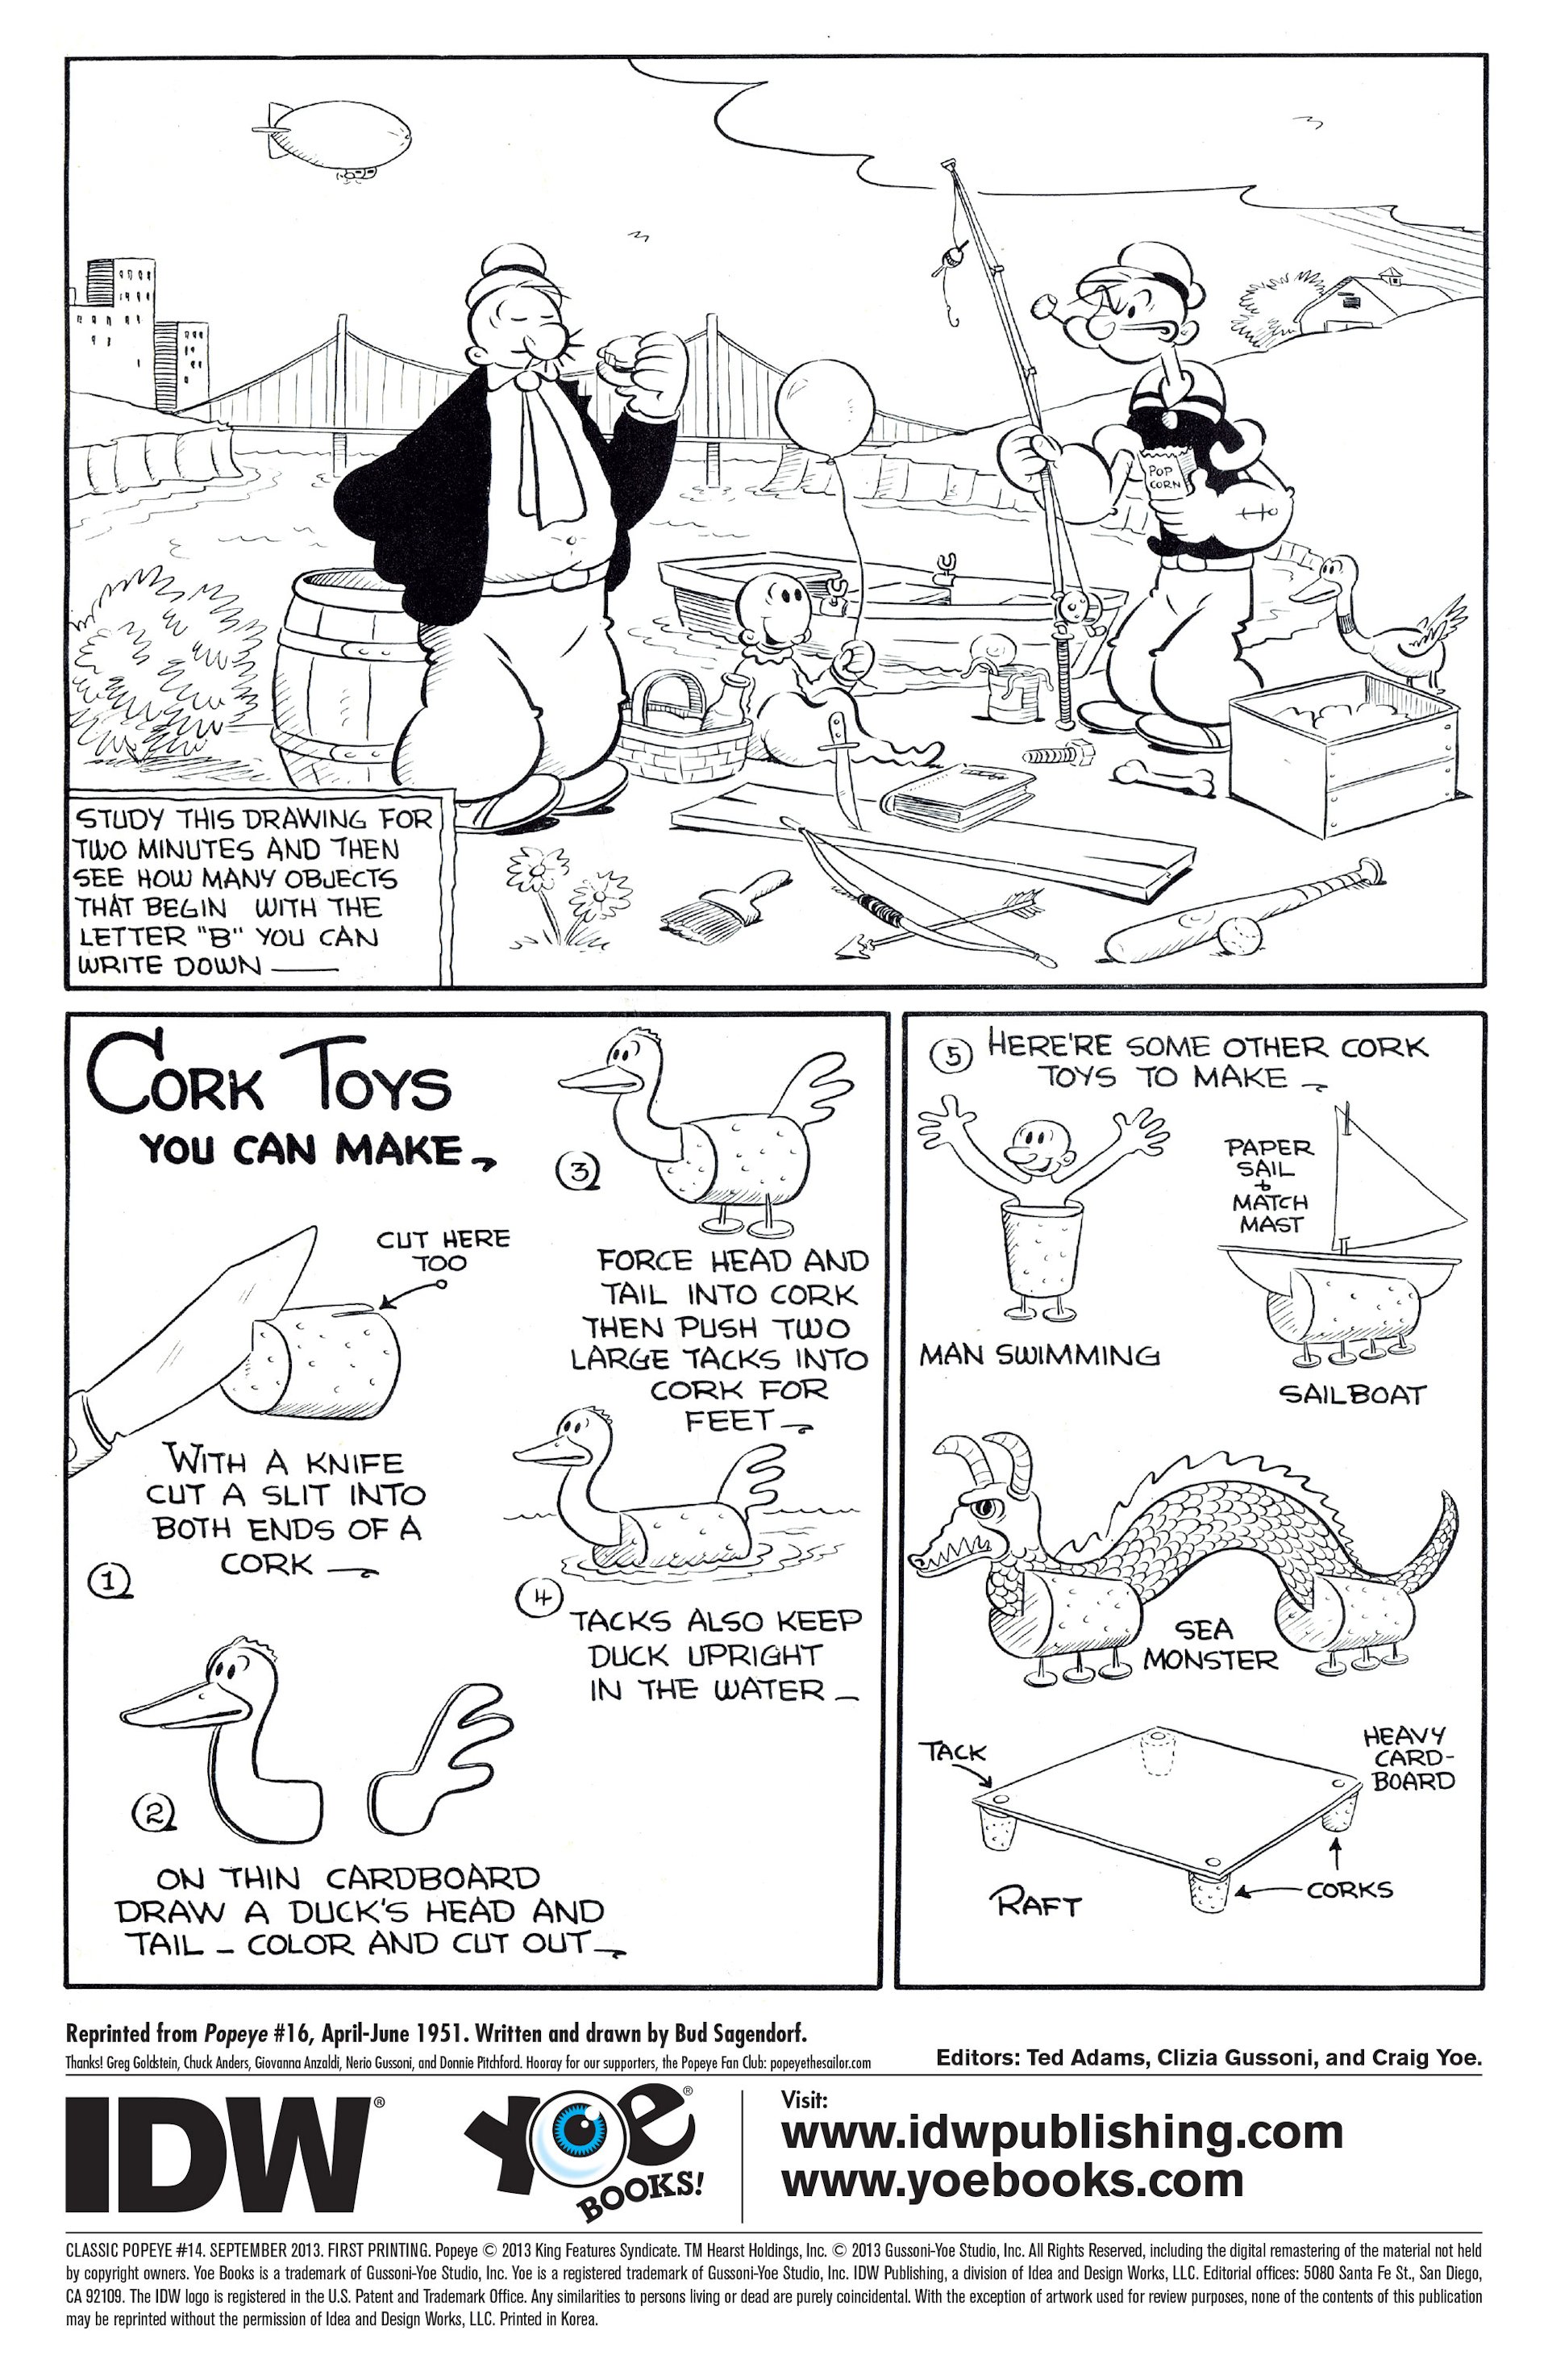 Read online Classic Popeye comic -  Issue #16 - 2